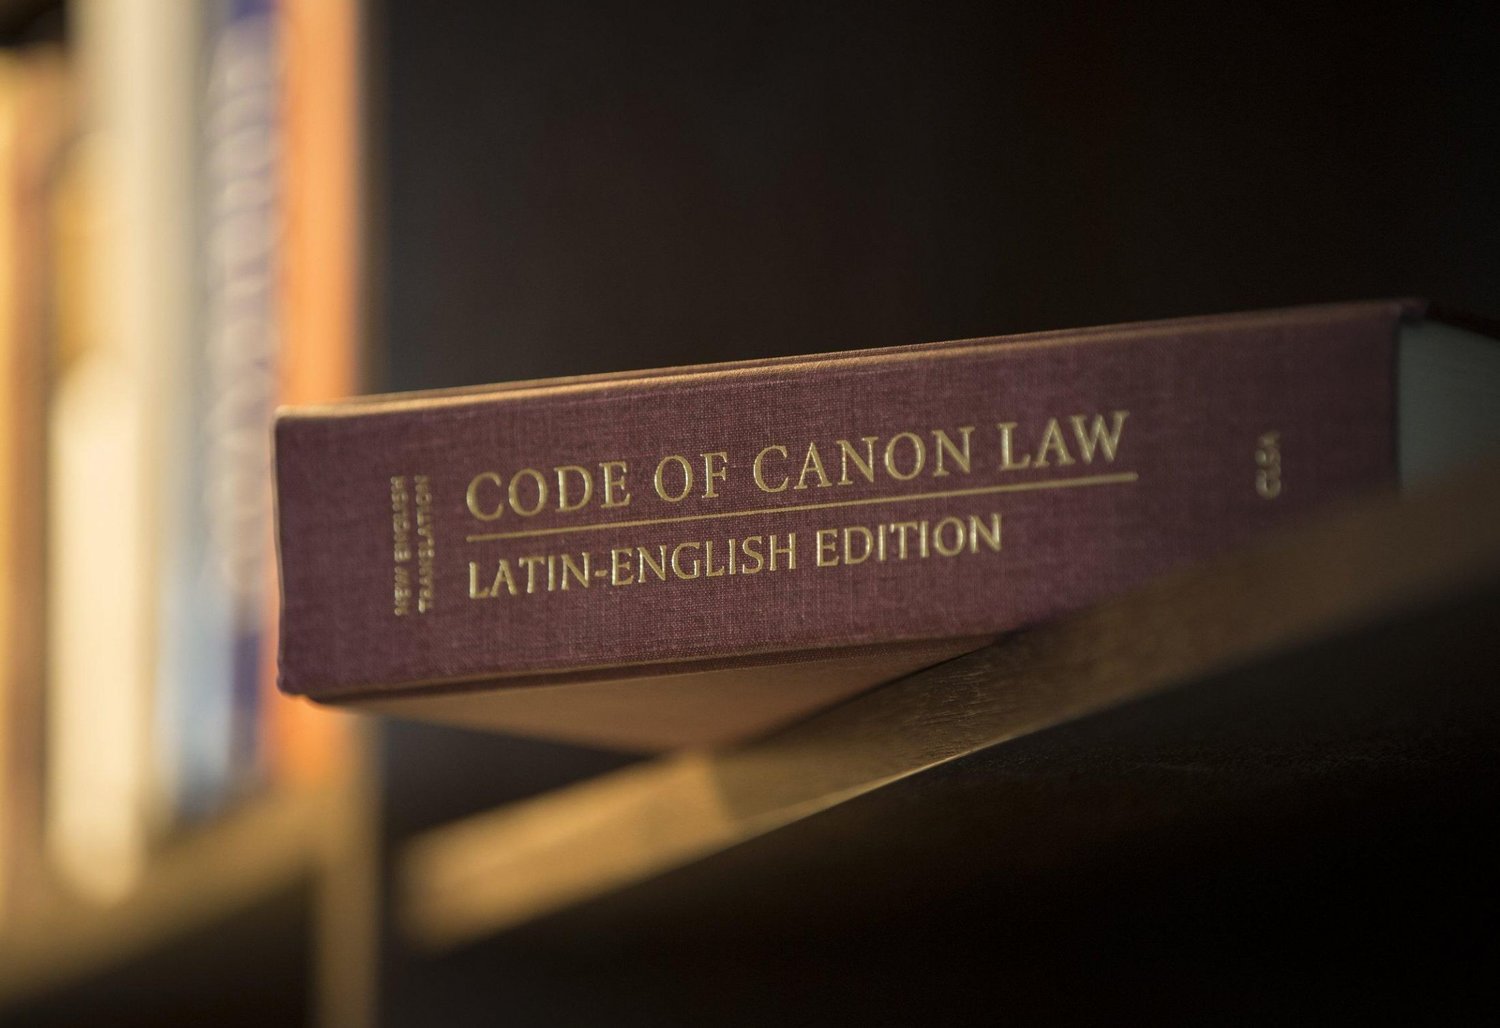 A Latin-English edition of the Code of Canon Law is pictured on a bookshelf. New canon law provisions approved by Pope Francis are expected to help the Catholic Church safeguard against abuse.